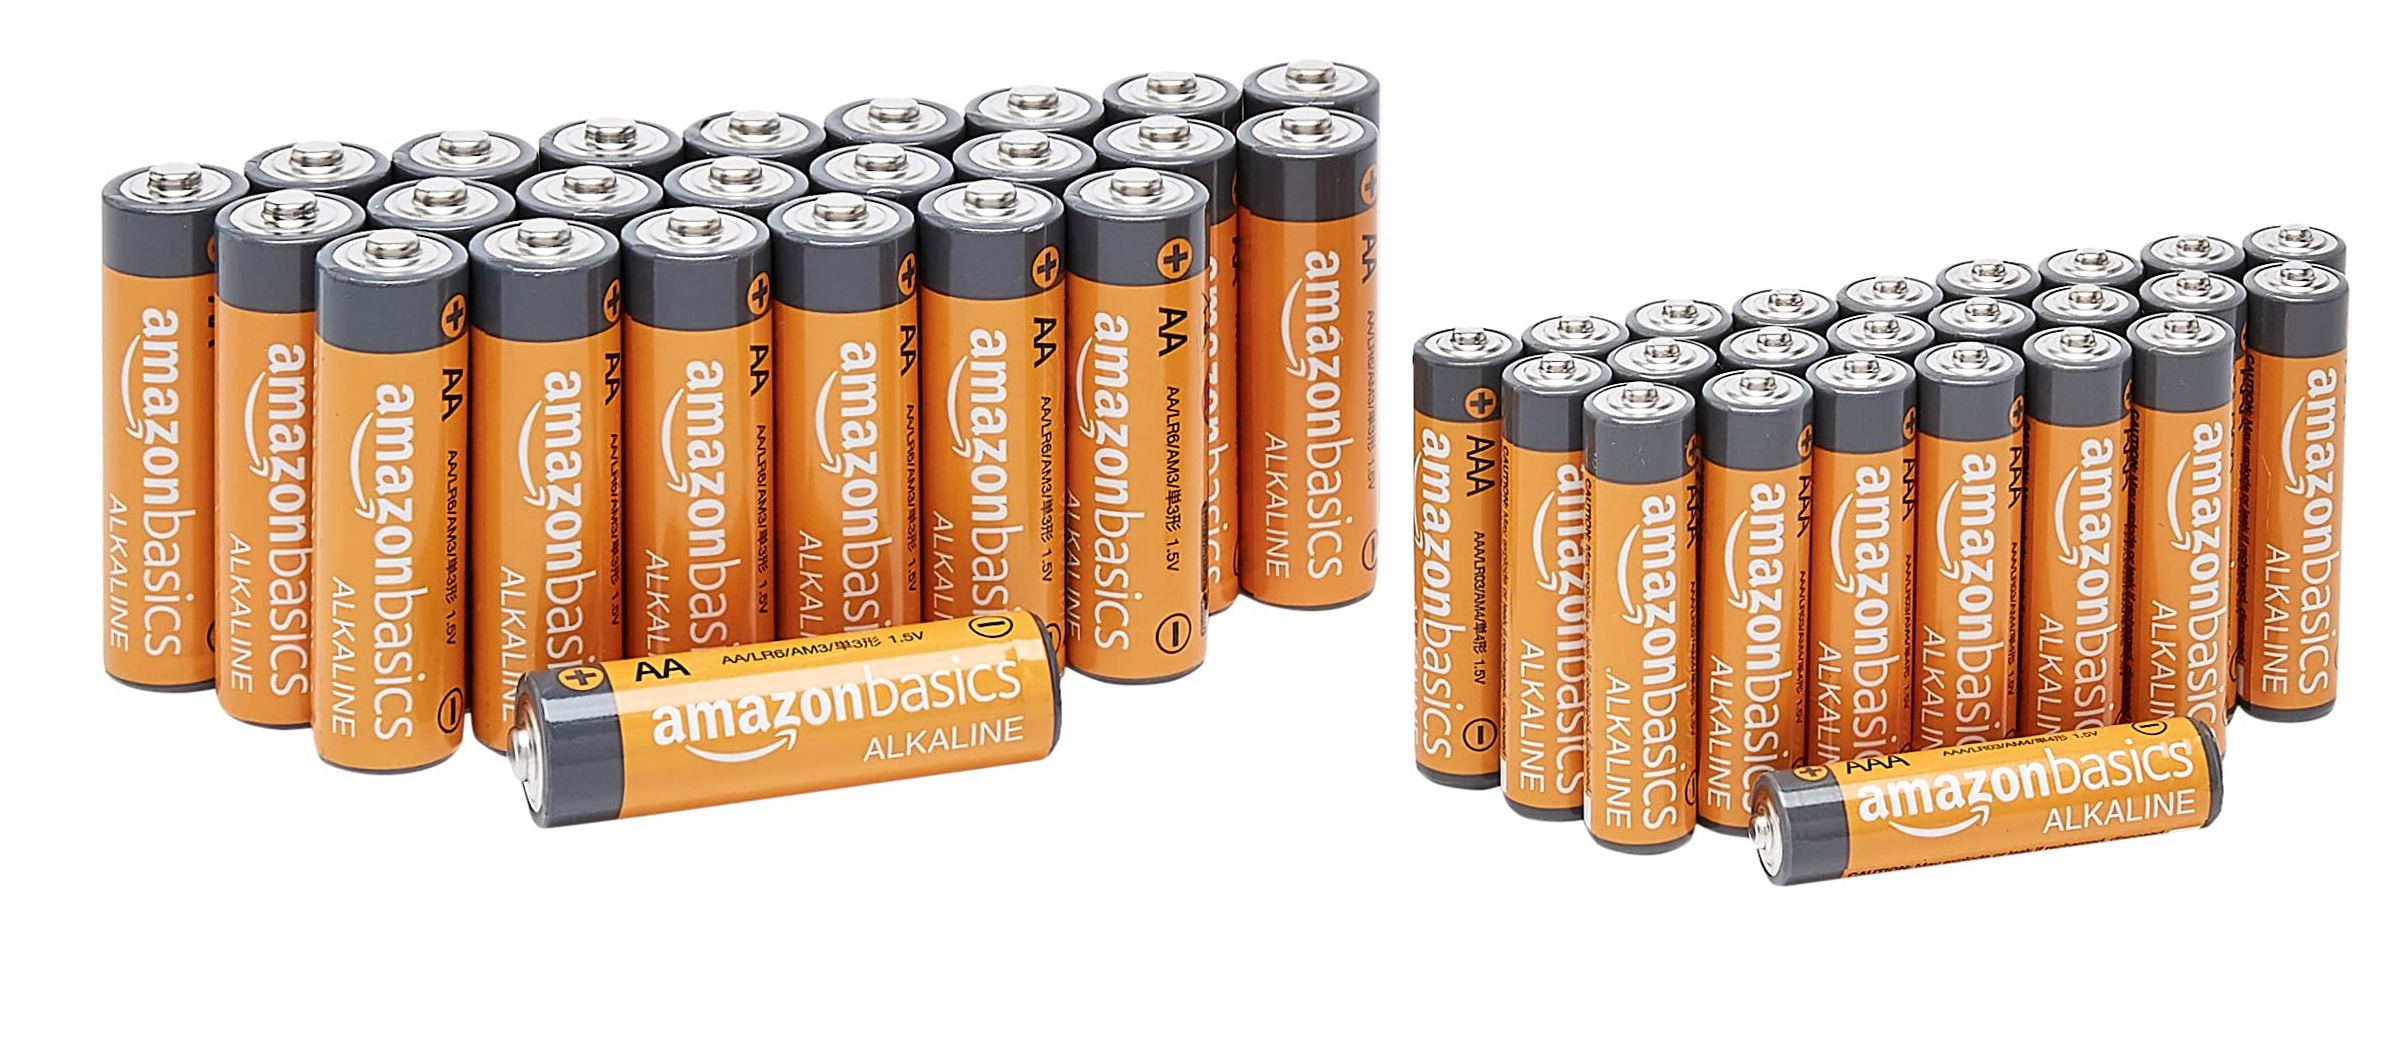 $11.97 /w S&S: Amazon Basics 48 Count AA & AAA High-Performance Batteries Value Pack